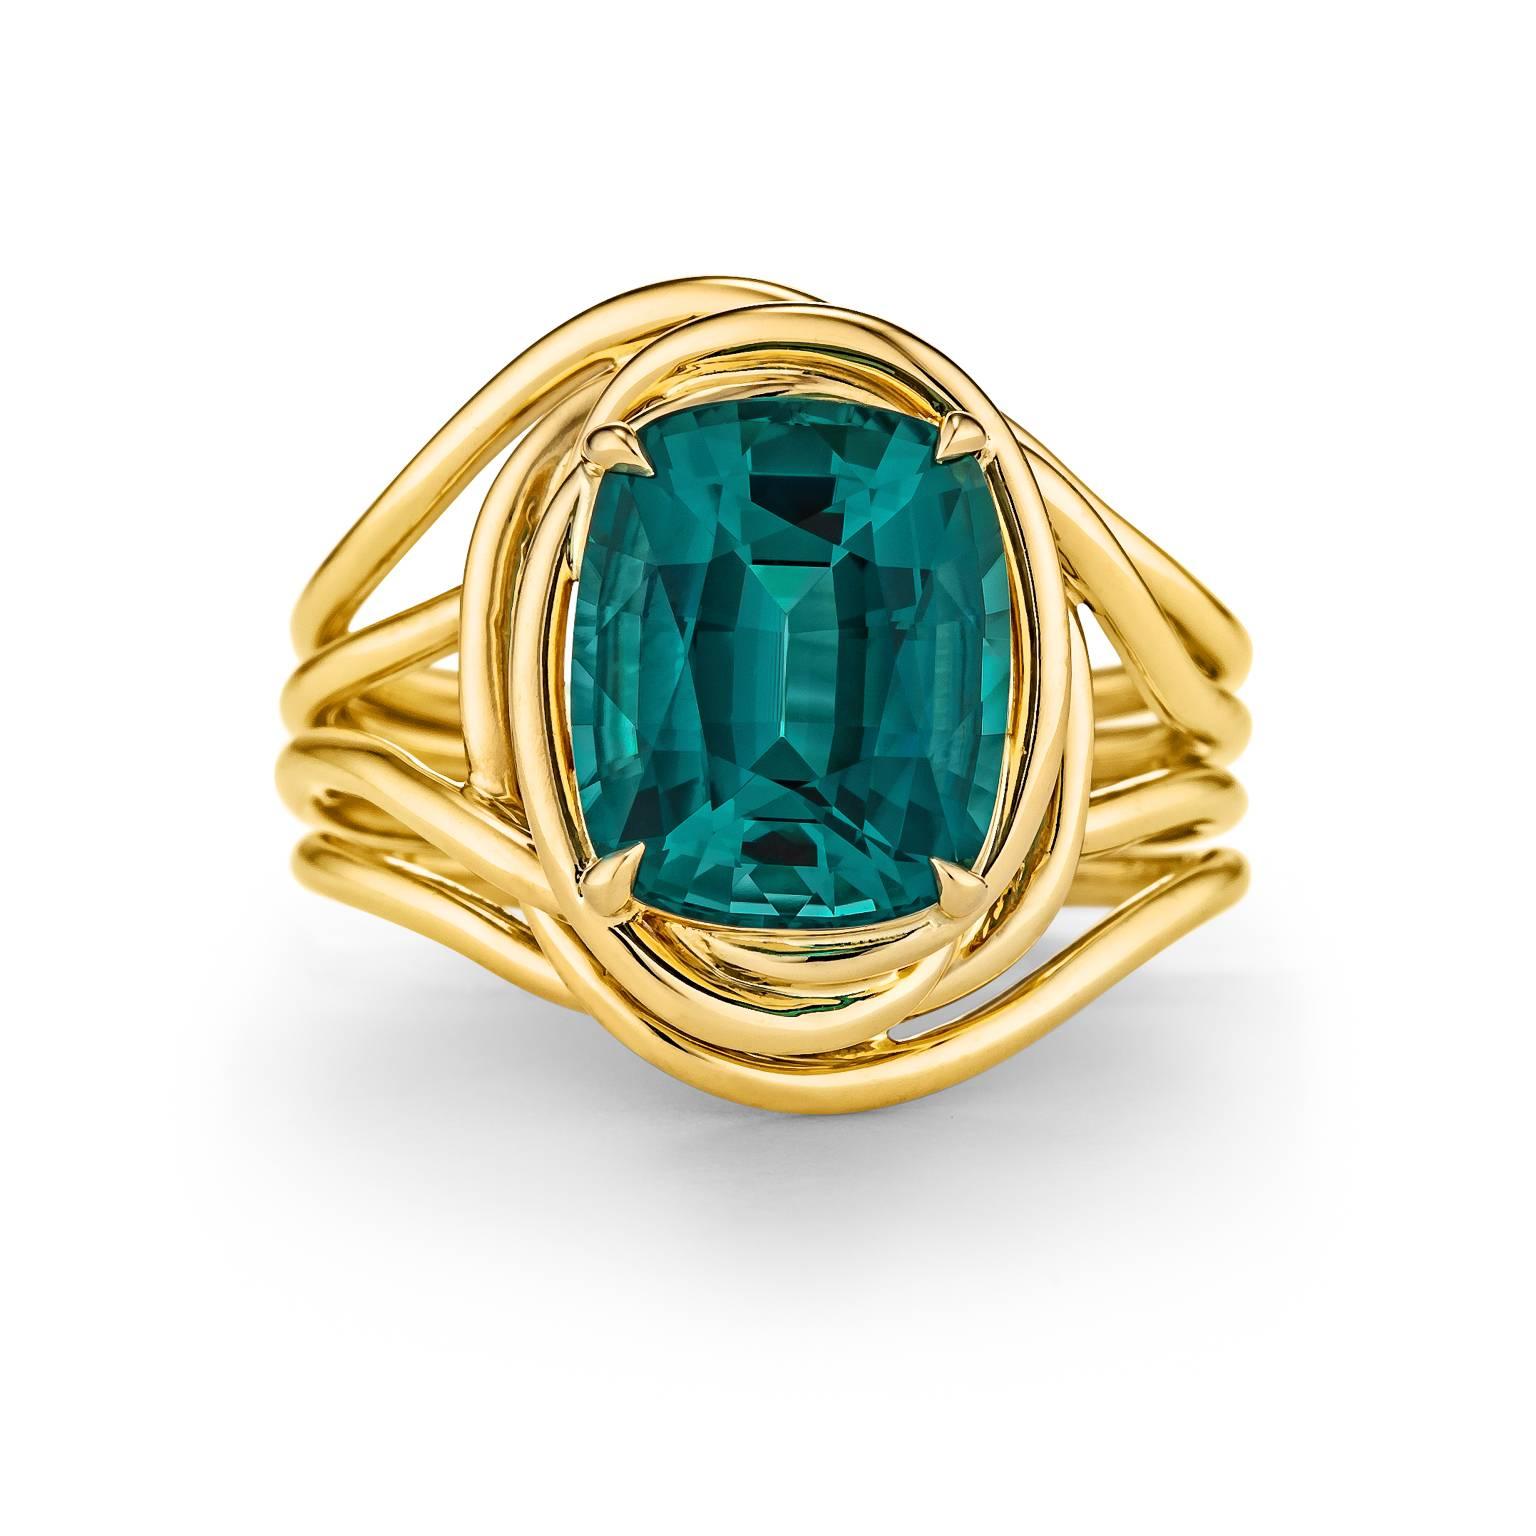 This 3.68 carat cushion cut indicolite tourmaline is the velvety blue/green color of a royal peacock.  Mounted atop four 18 karat yellow gold organically intertwined gold ropes, this precious gemstone's color is dreamy to look at and magical to